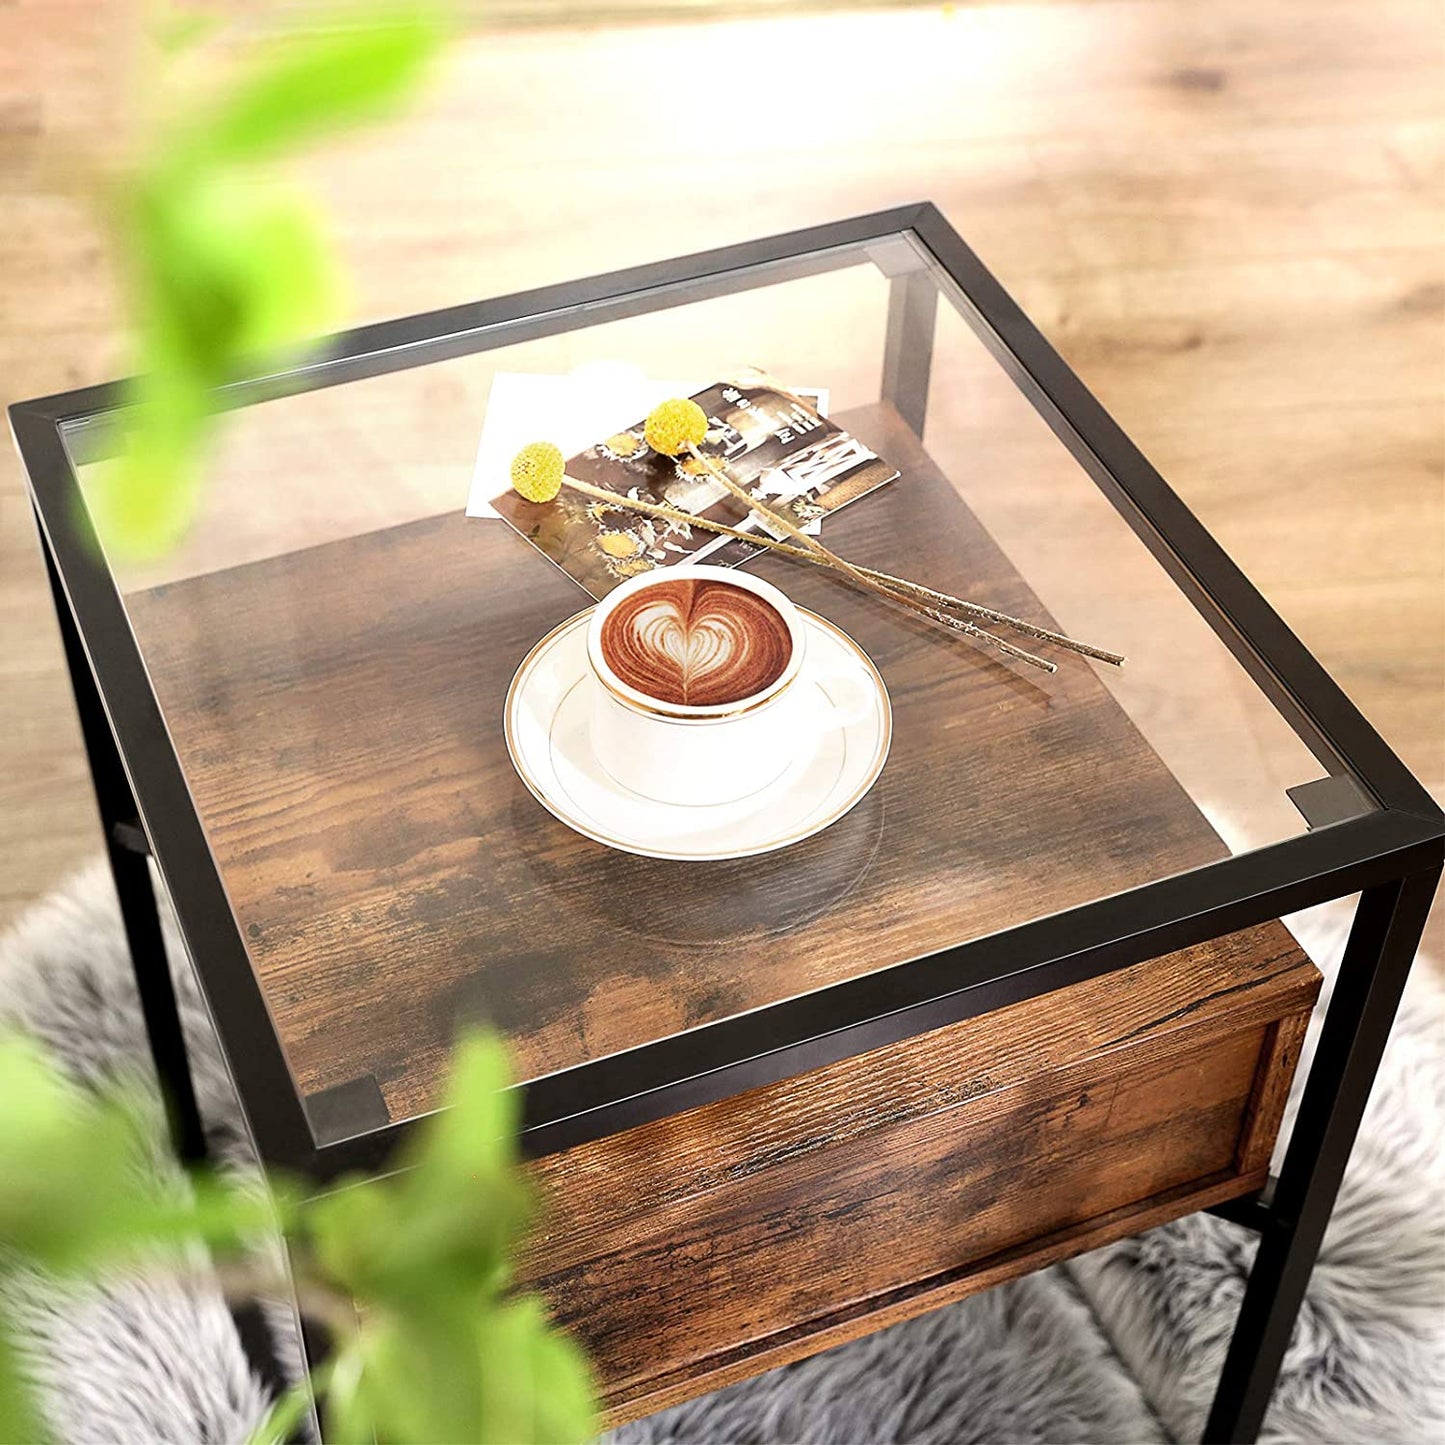 Tempered Glass End Table with Drawer and Rustic Shelf  Stable Iron Frame